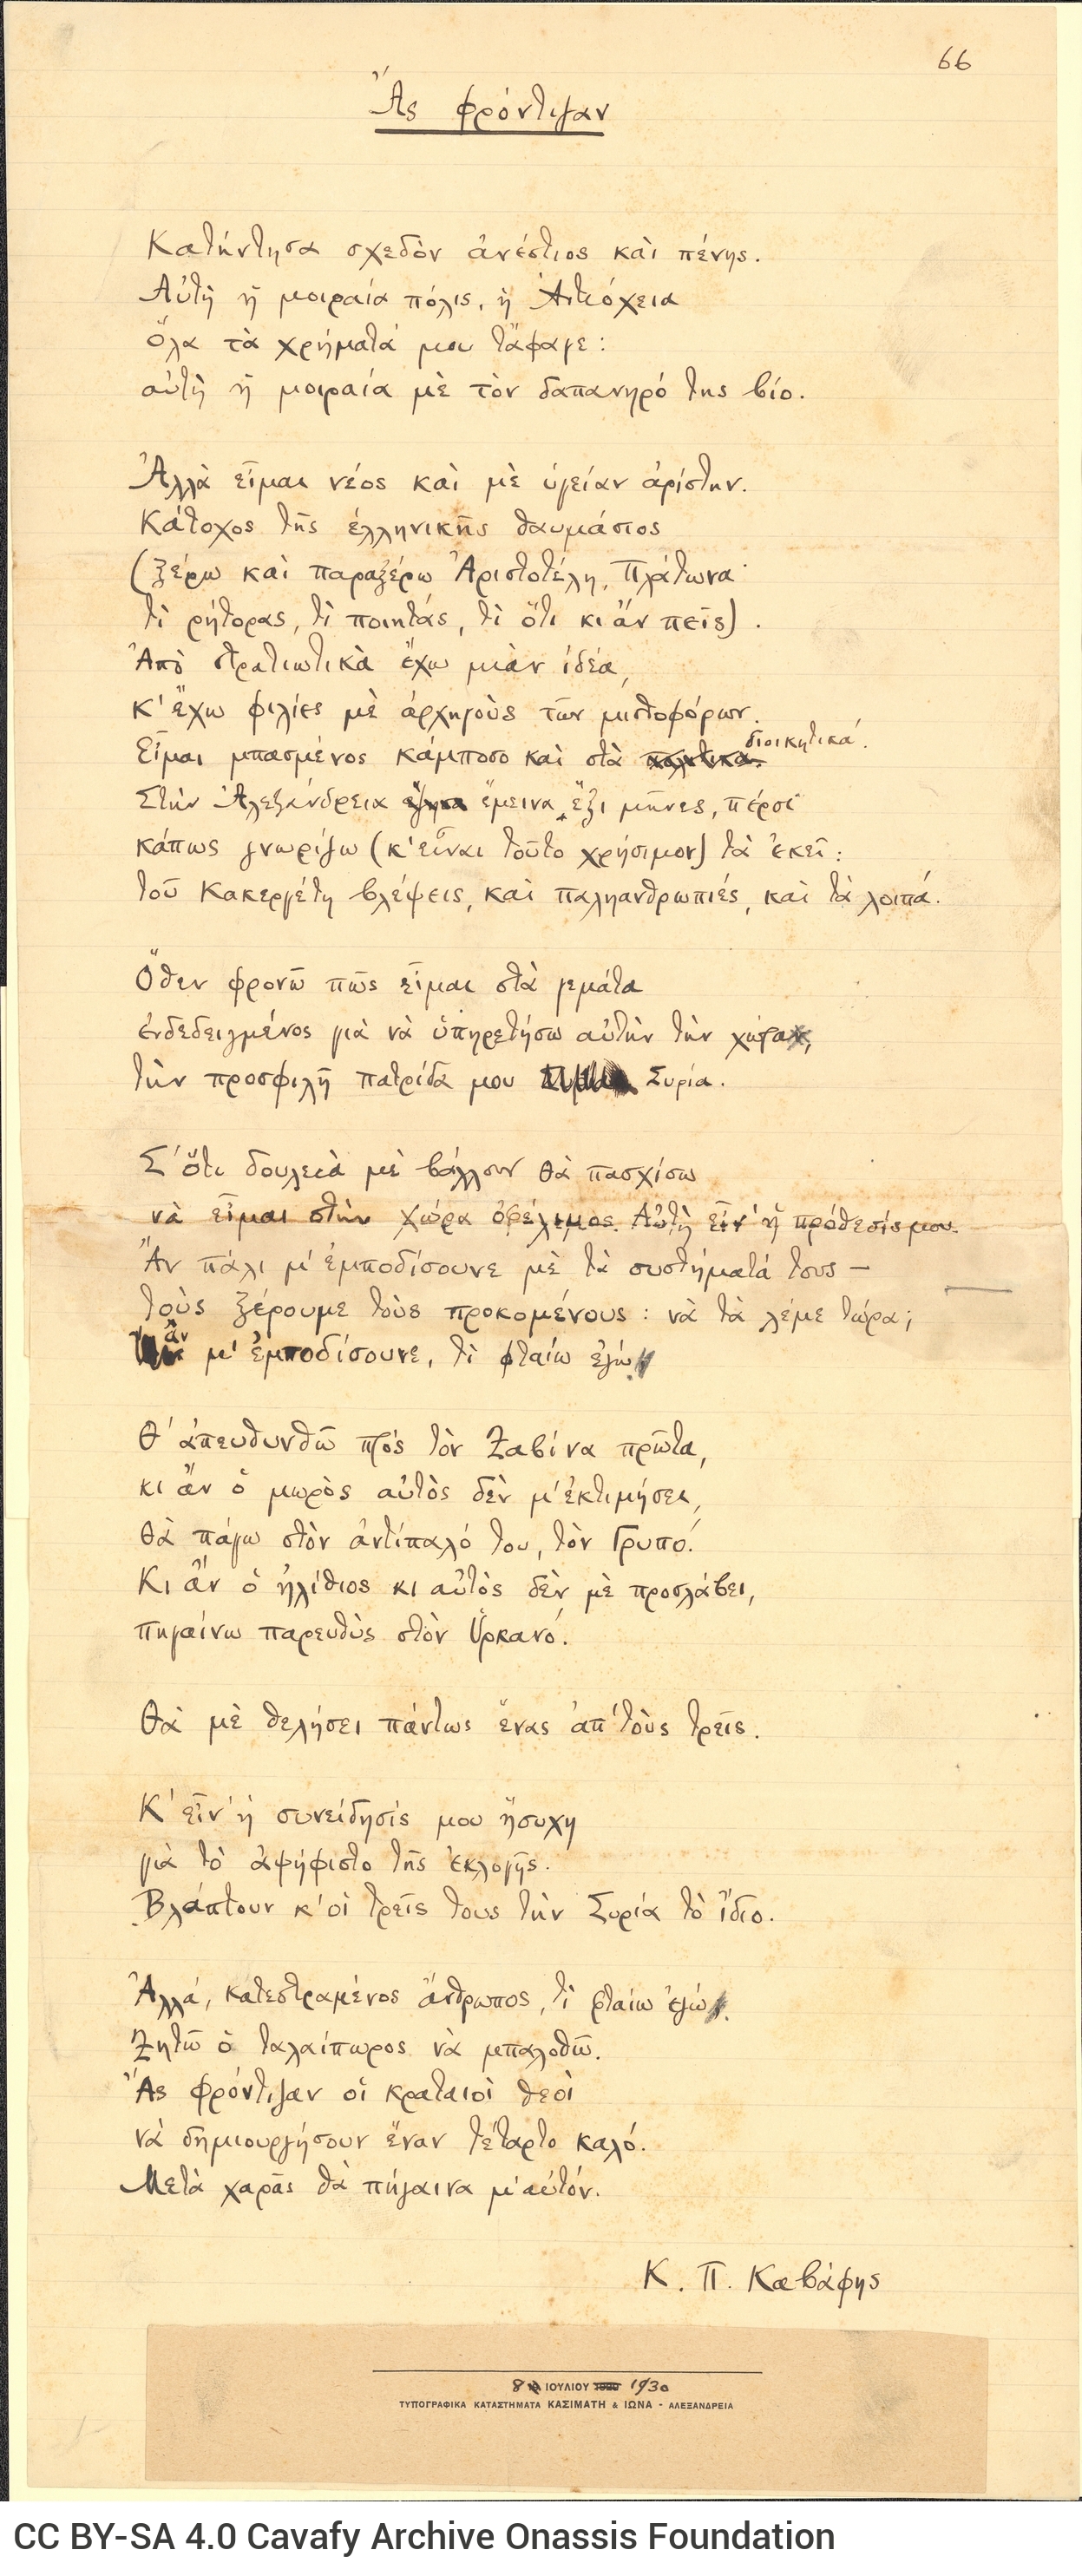 Autograph manuscript of the poem "Should Have Taken the Trouble". Cancellations and emendations. At the bottom, affixed piece